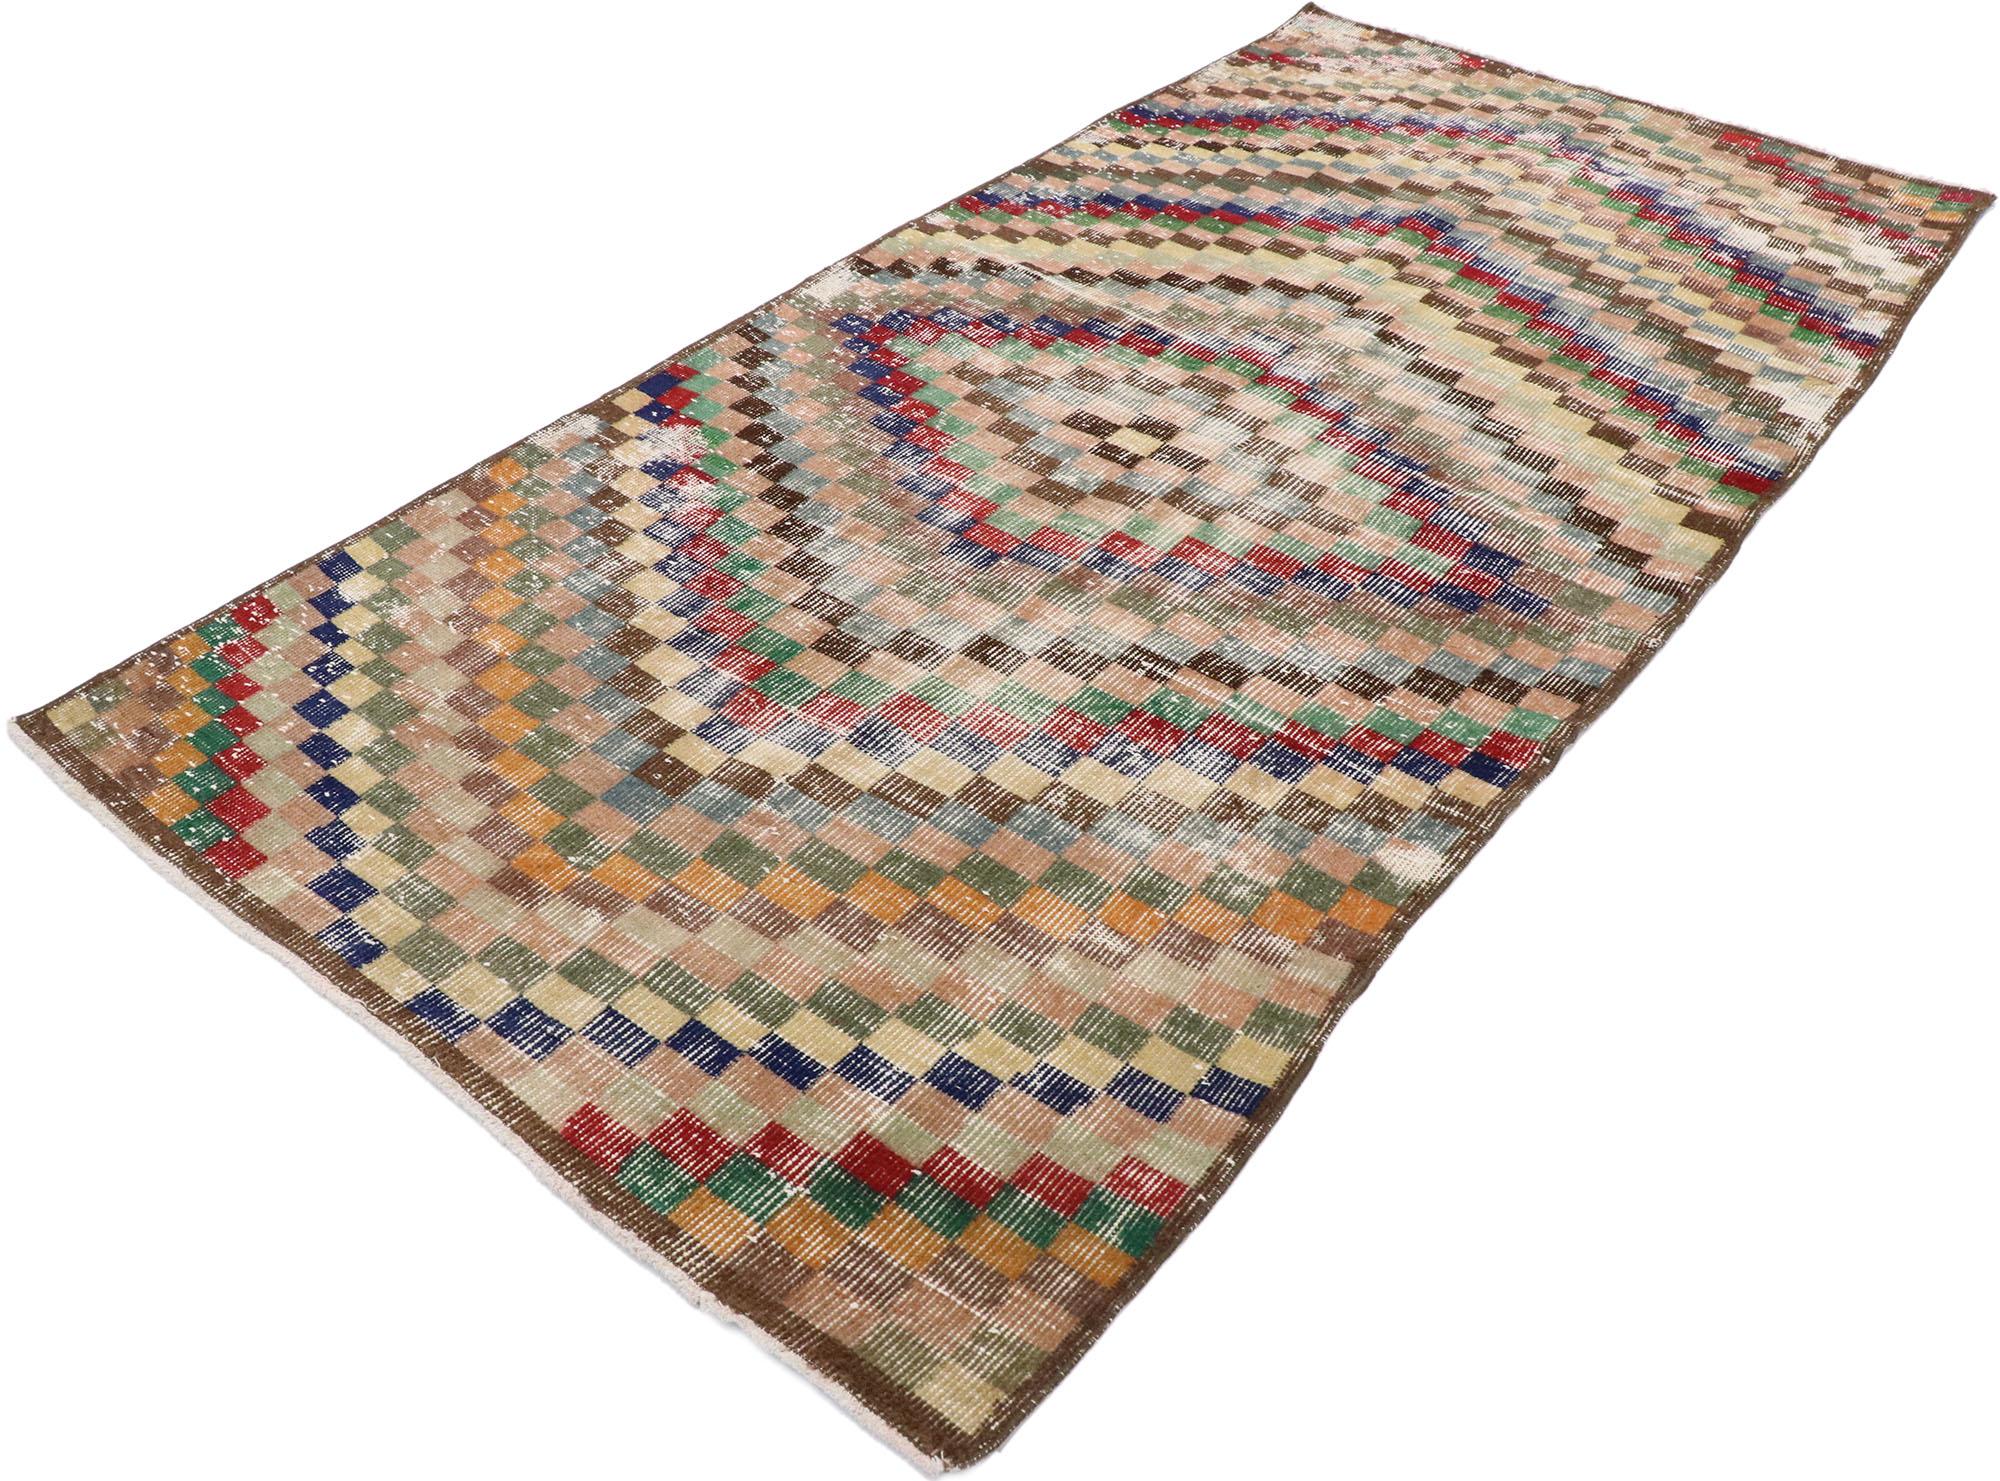 53354, Distressed Vintage Turkish Sivas Rug with Modern Cubist Style. This hand knotted wool distressed vintage Turkish Sivas rug features an all-over checkered pattern. Color-blocked concentric diamonds comprised of small cubes and squares radiate